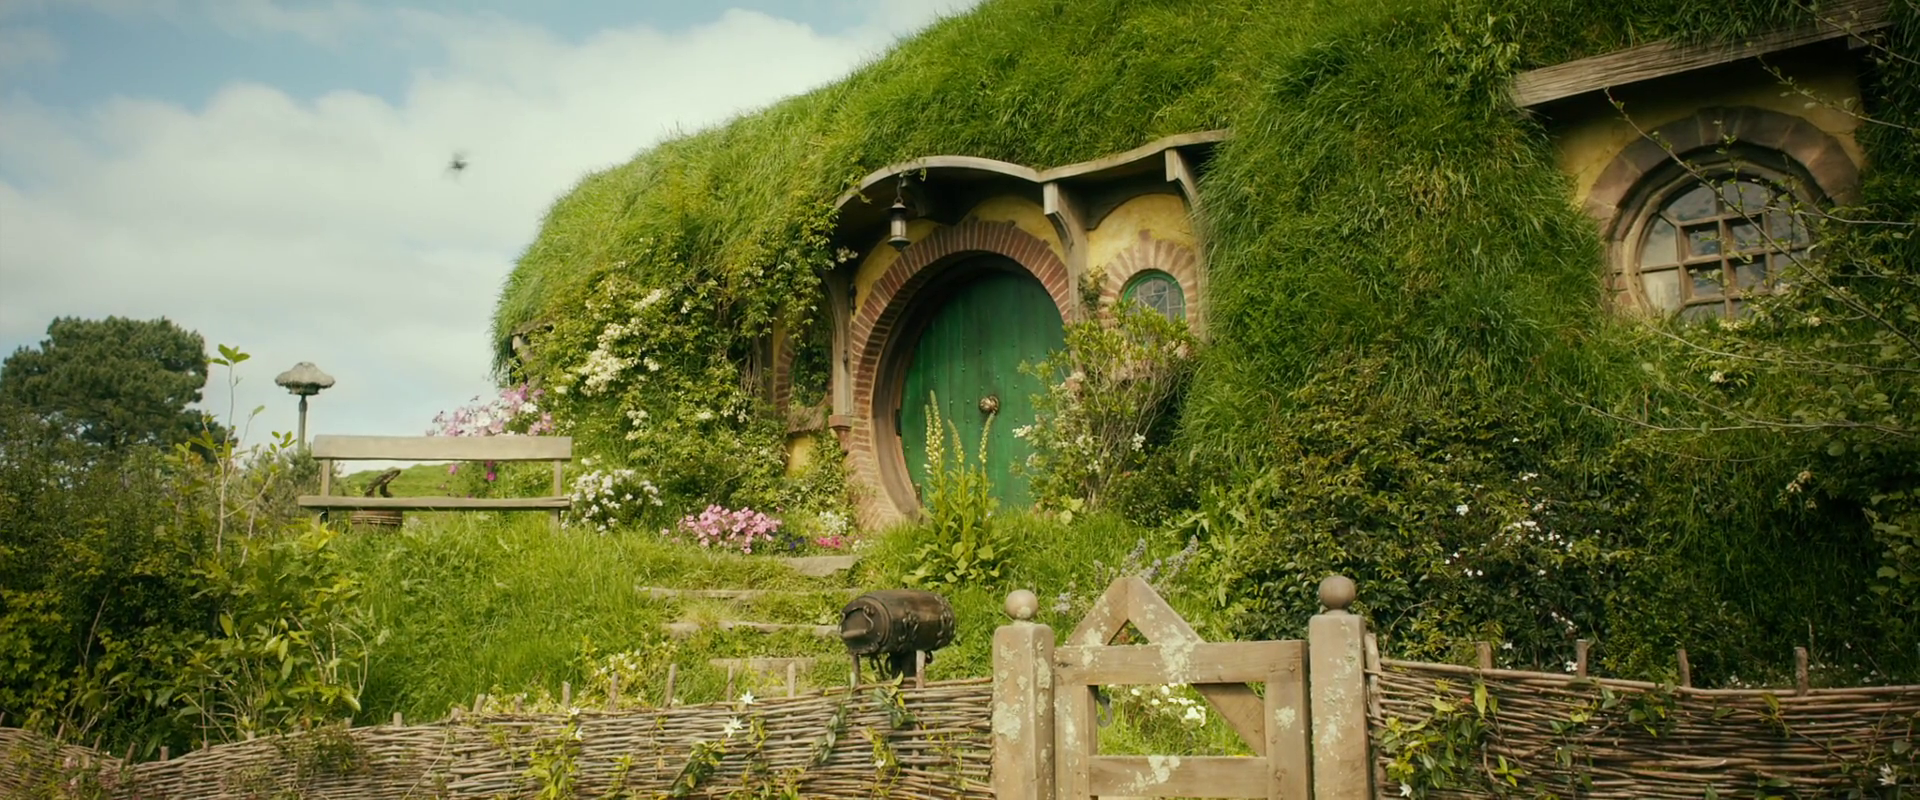 The entrance of Bag End, The Shire Diorama. The Lord of the Rings - White  Weasel Studio